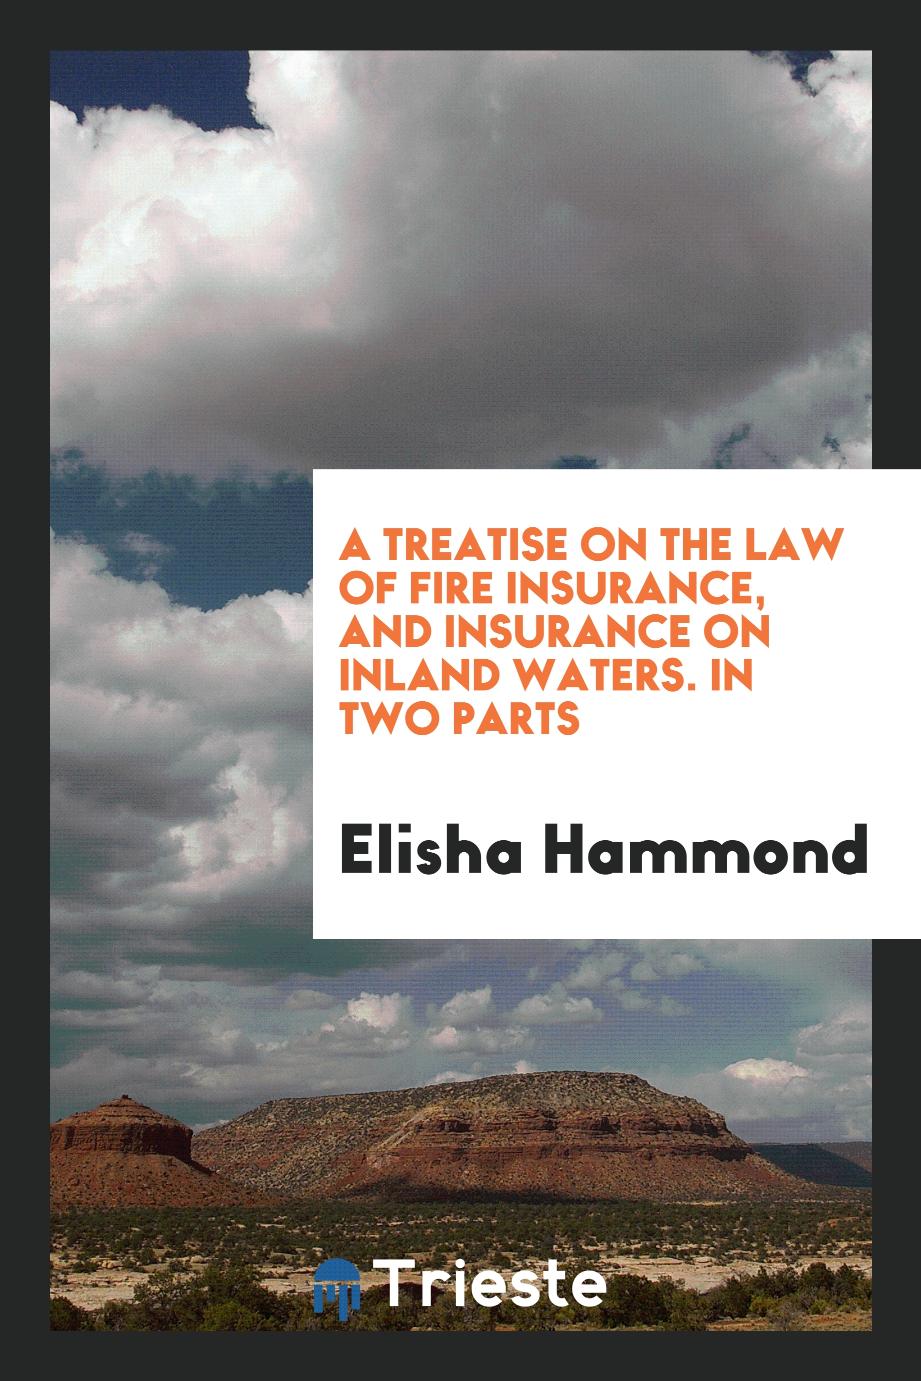 A Treatise on the Law of Fire Insurance, and Insurance on Inland Waters. In Two Parts